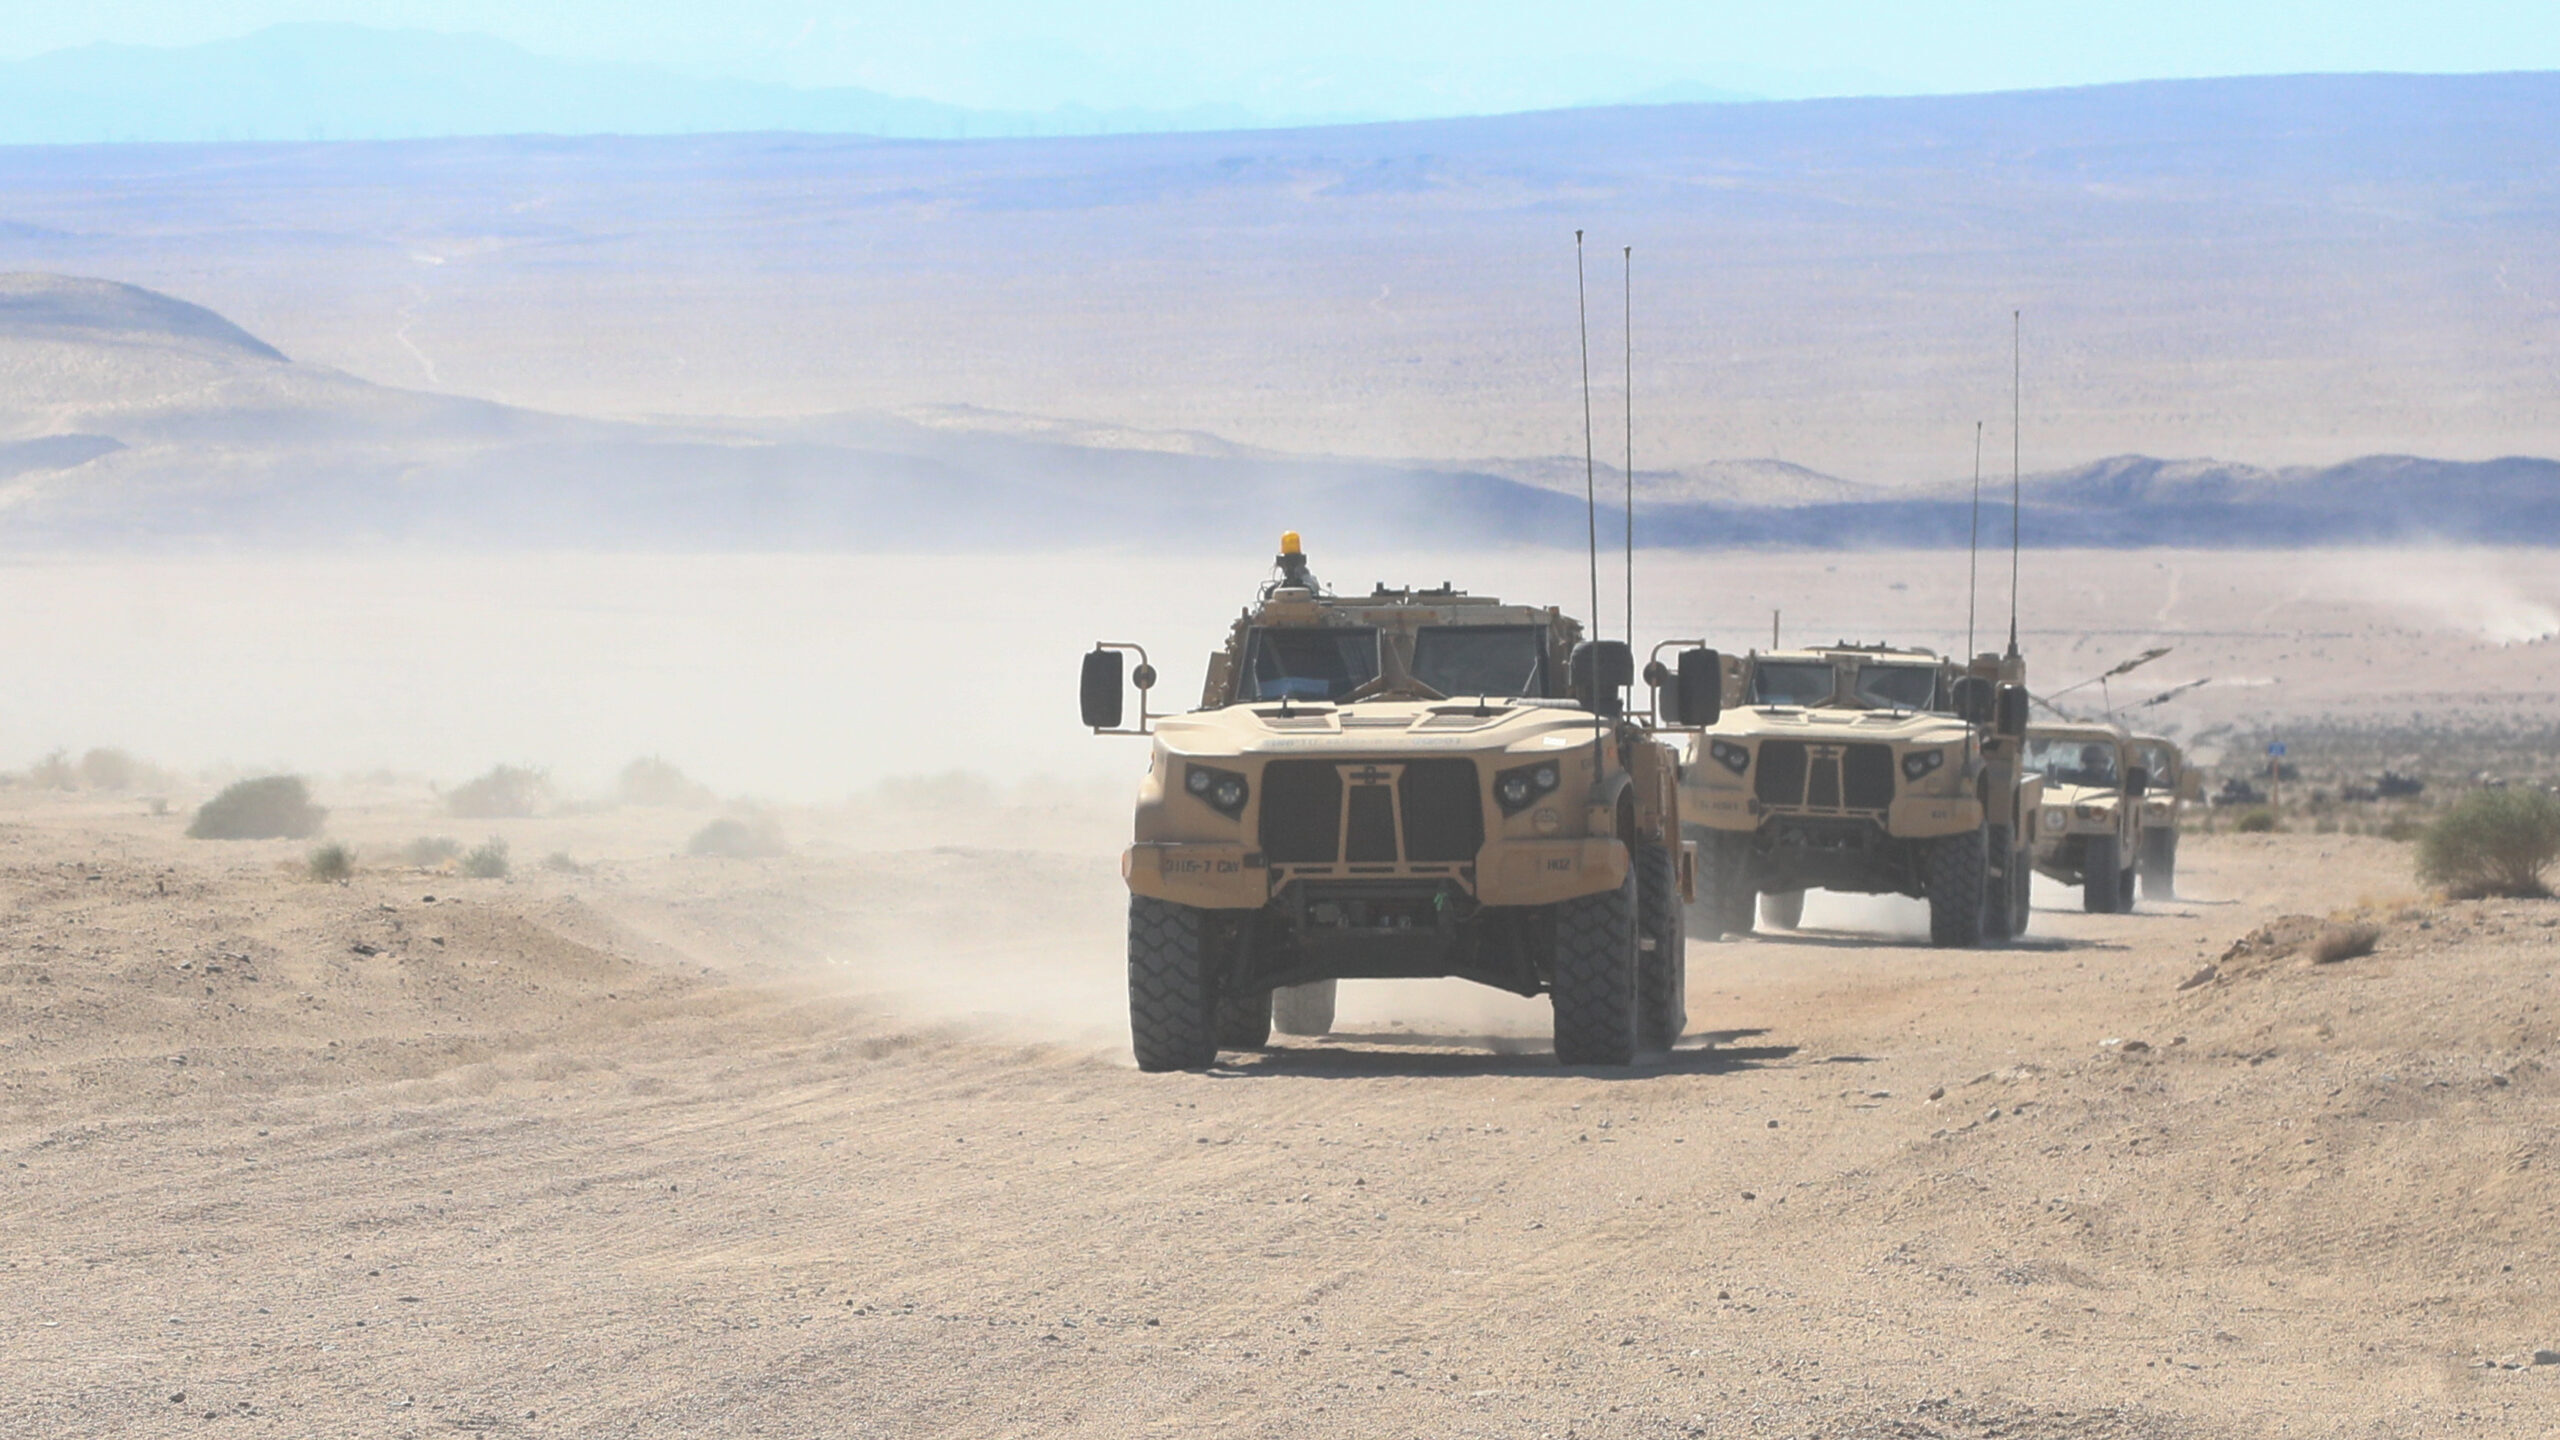 SOCOM receives first Spike NLOS system integrated on a JLTV